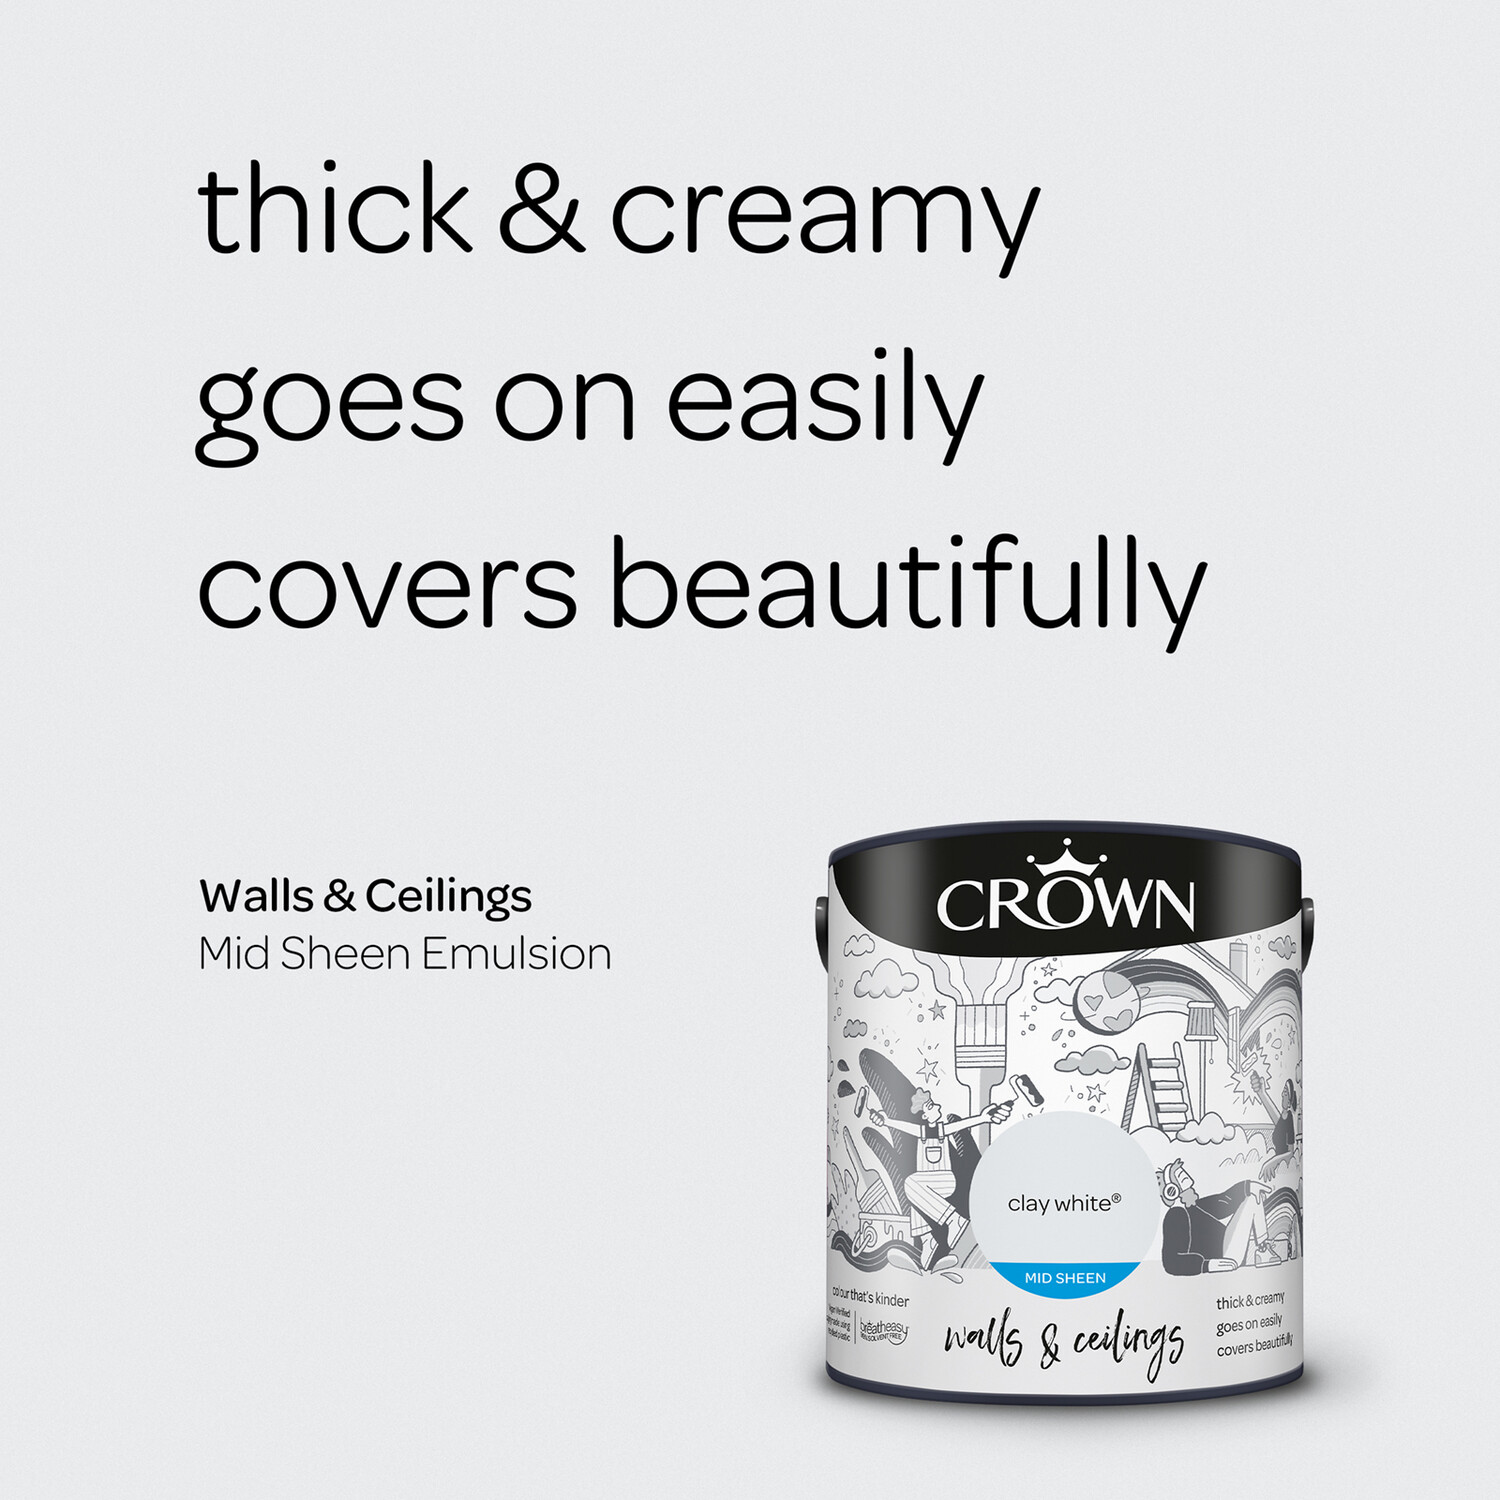 Crown Walls & Ceilings Clay White Mid Sheen Emulsion Paint 2.5L Image 8